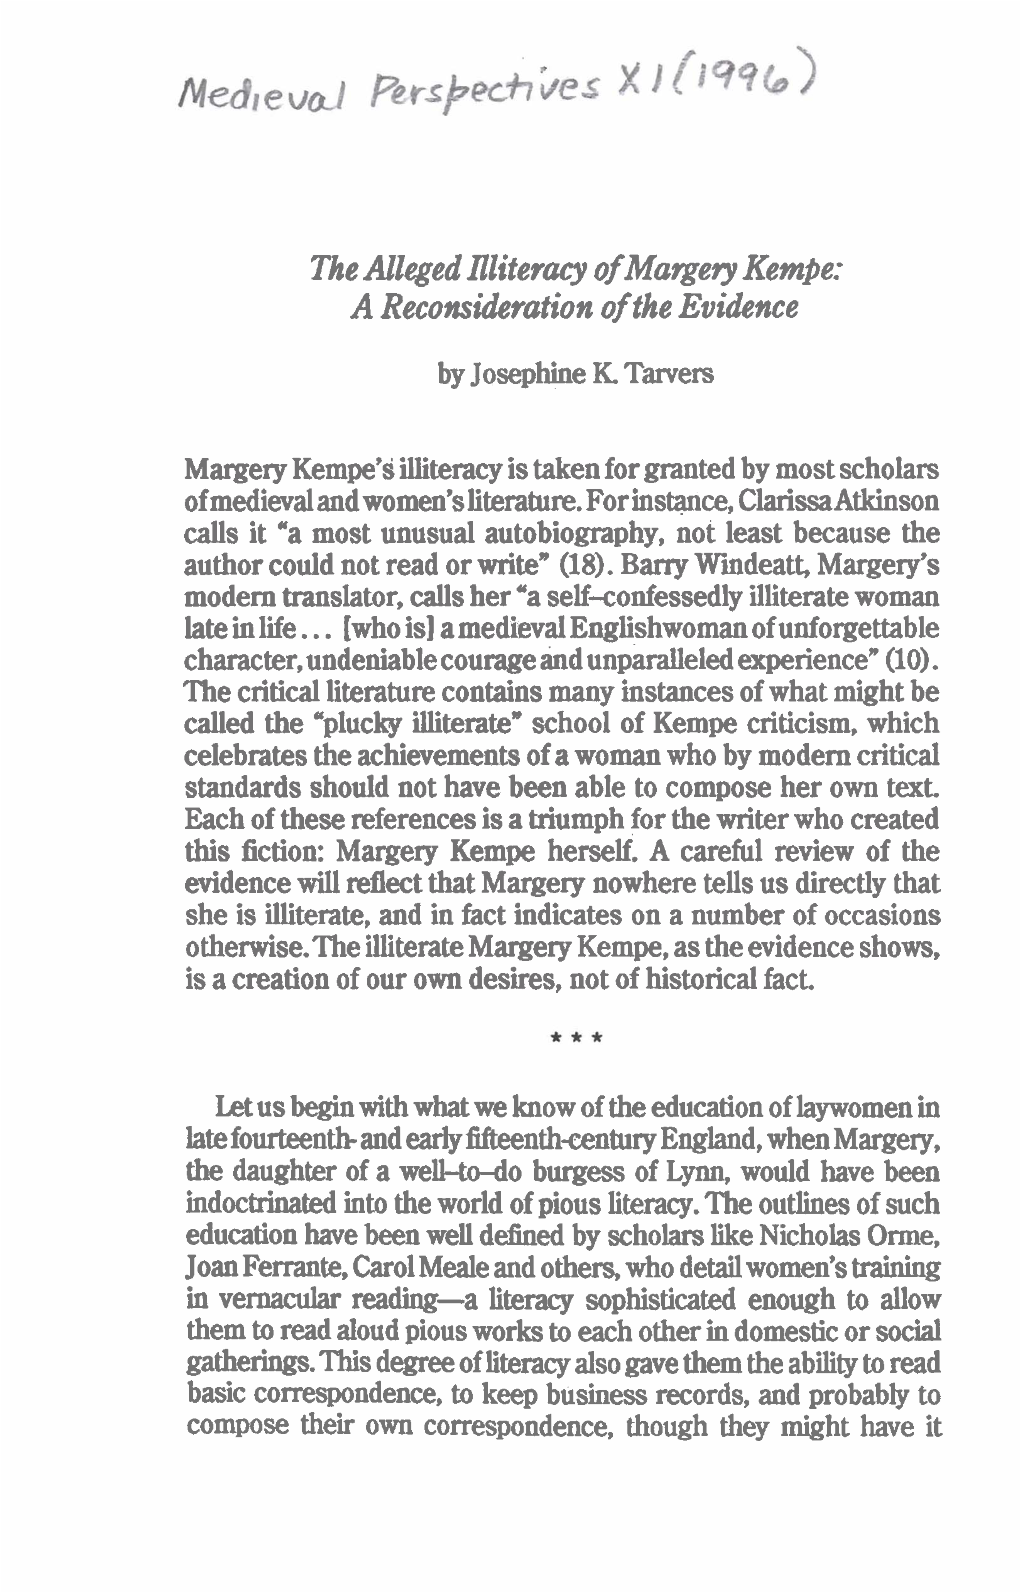 The Alleged Illiteracy of Mamery Kempe: a Reconsideration of the Evidence by Josephine K